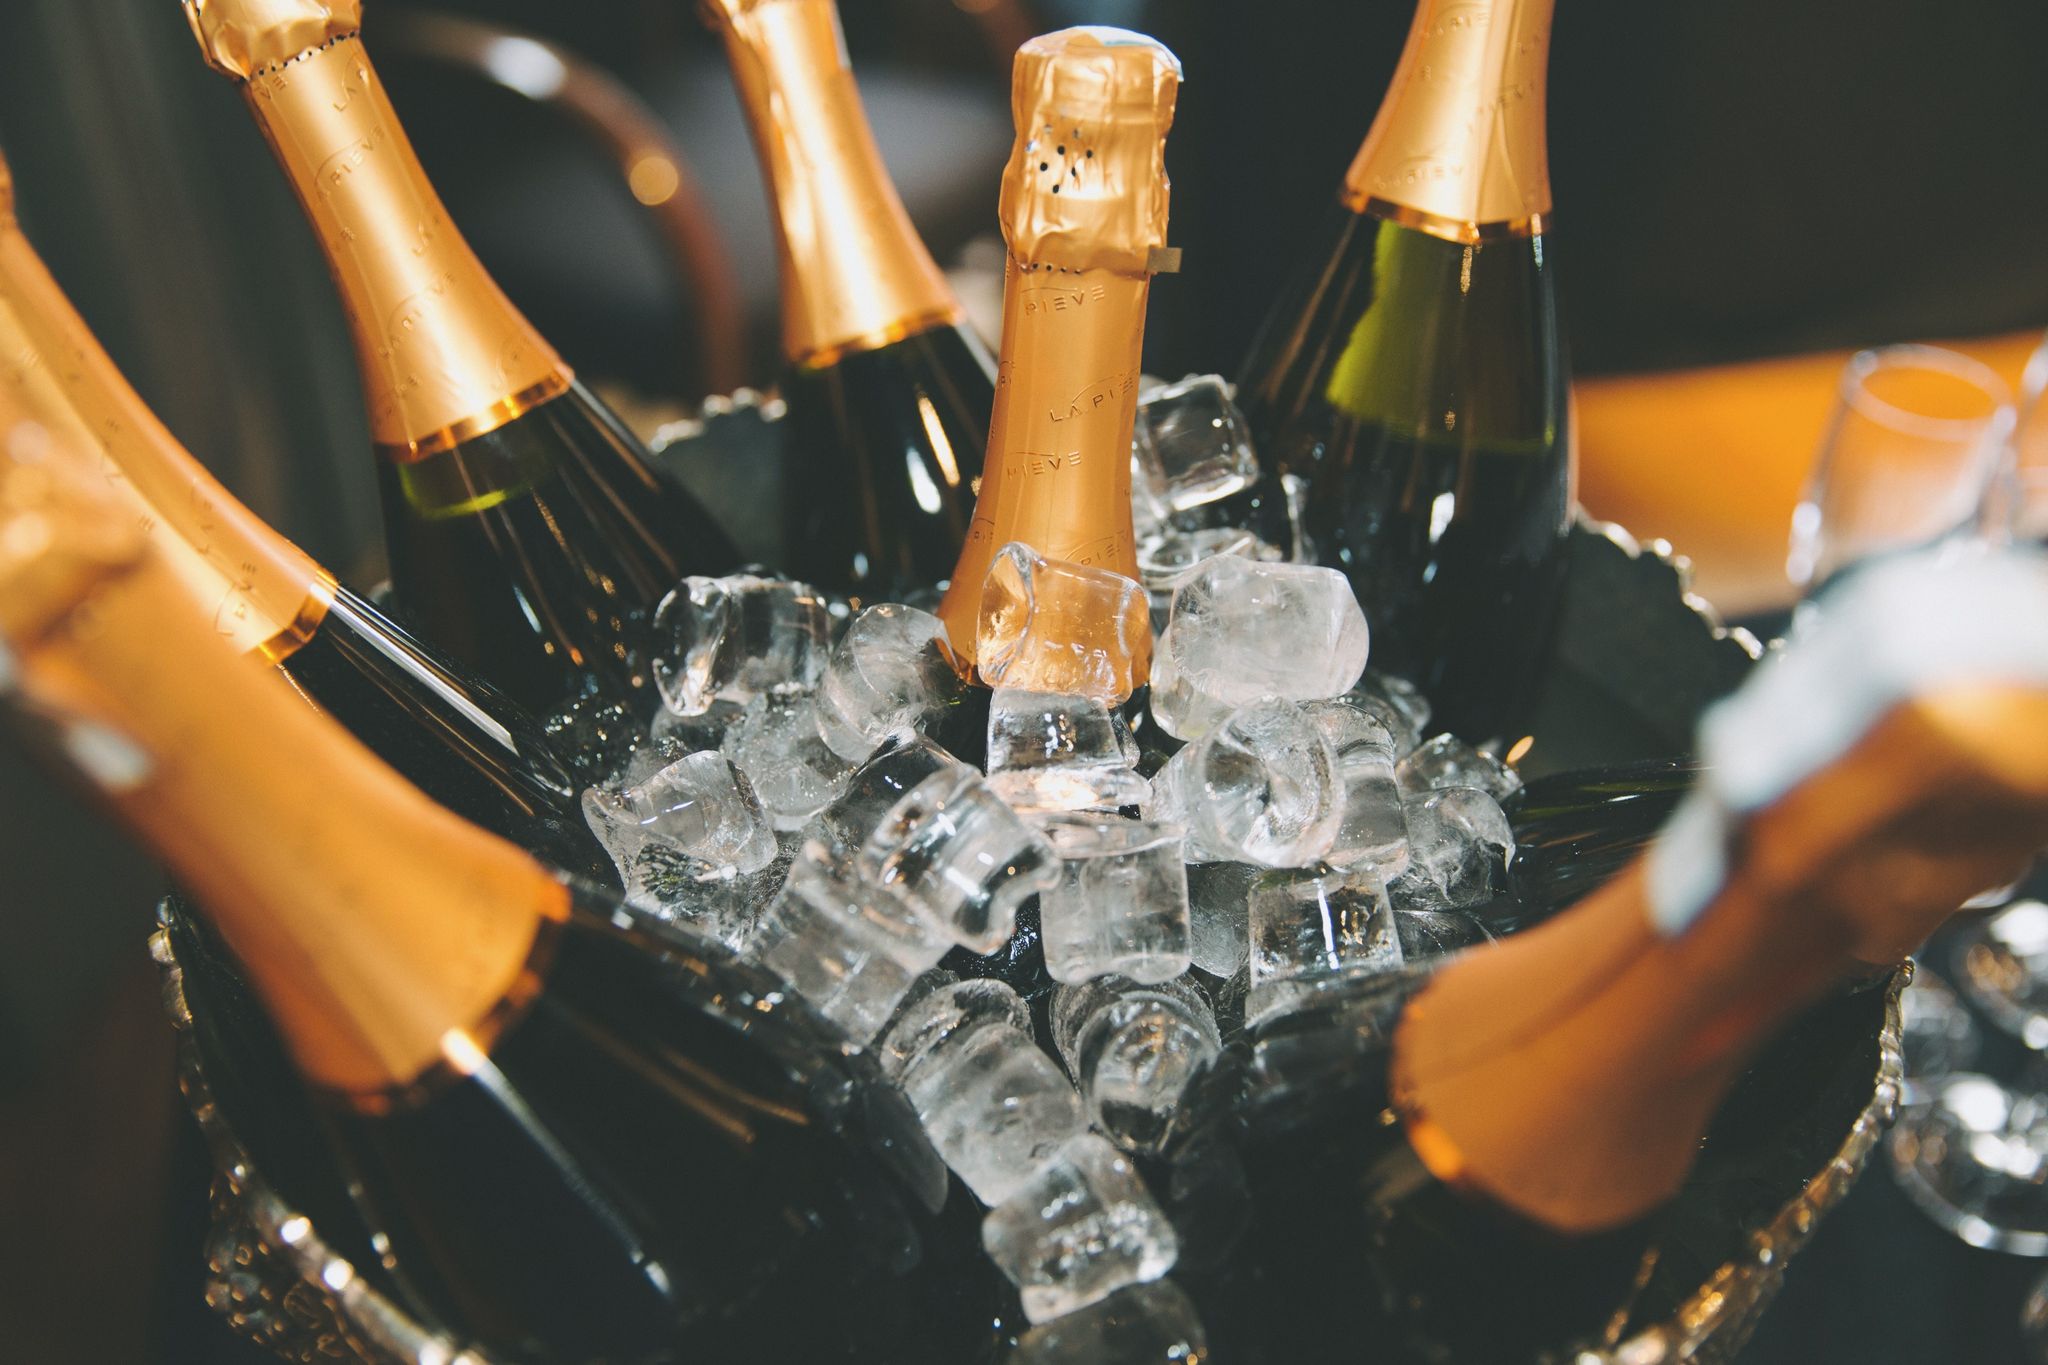 Why over 1 million bottles of Prosecco will be wasted this Christmas